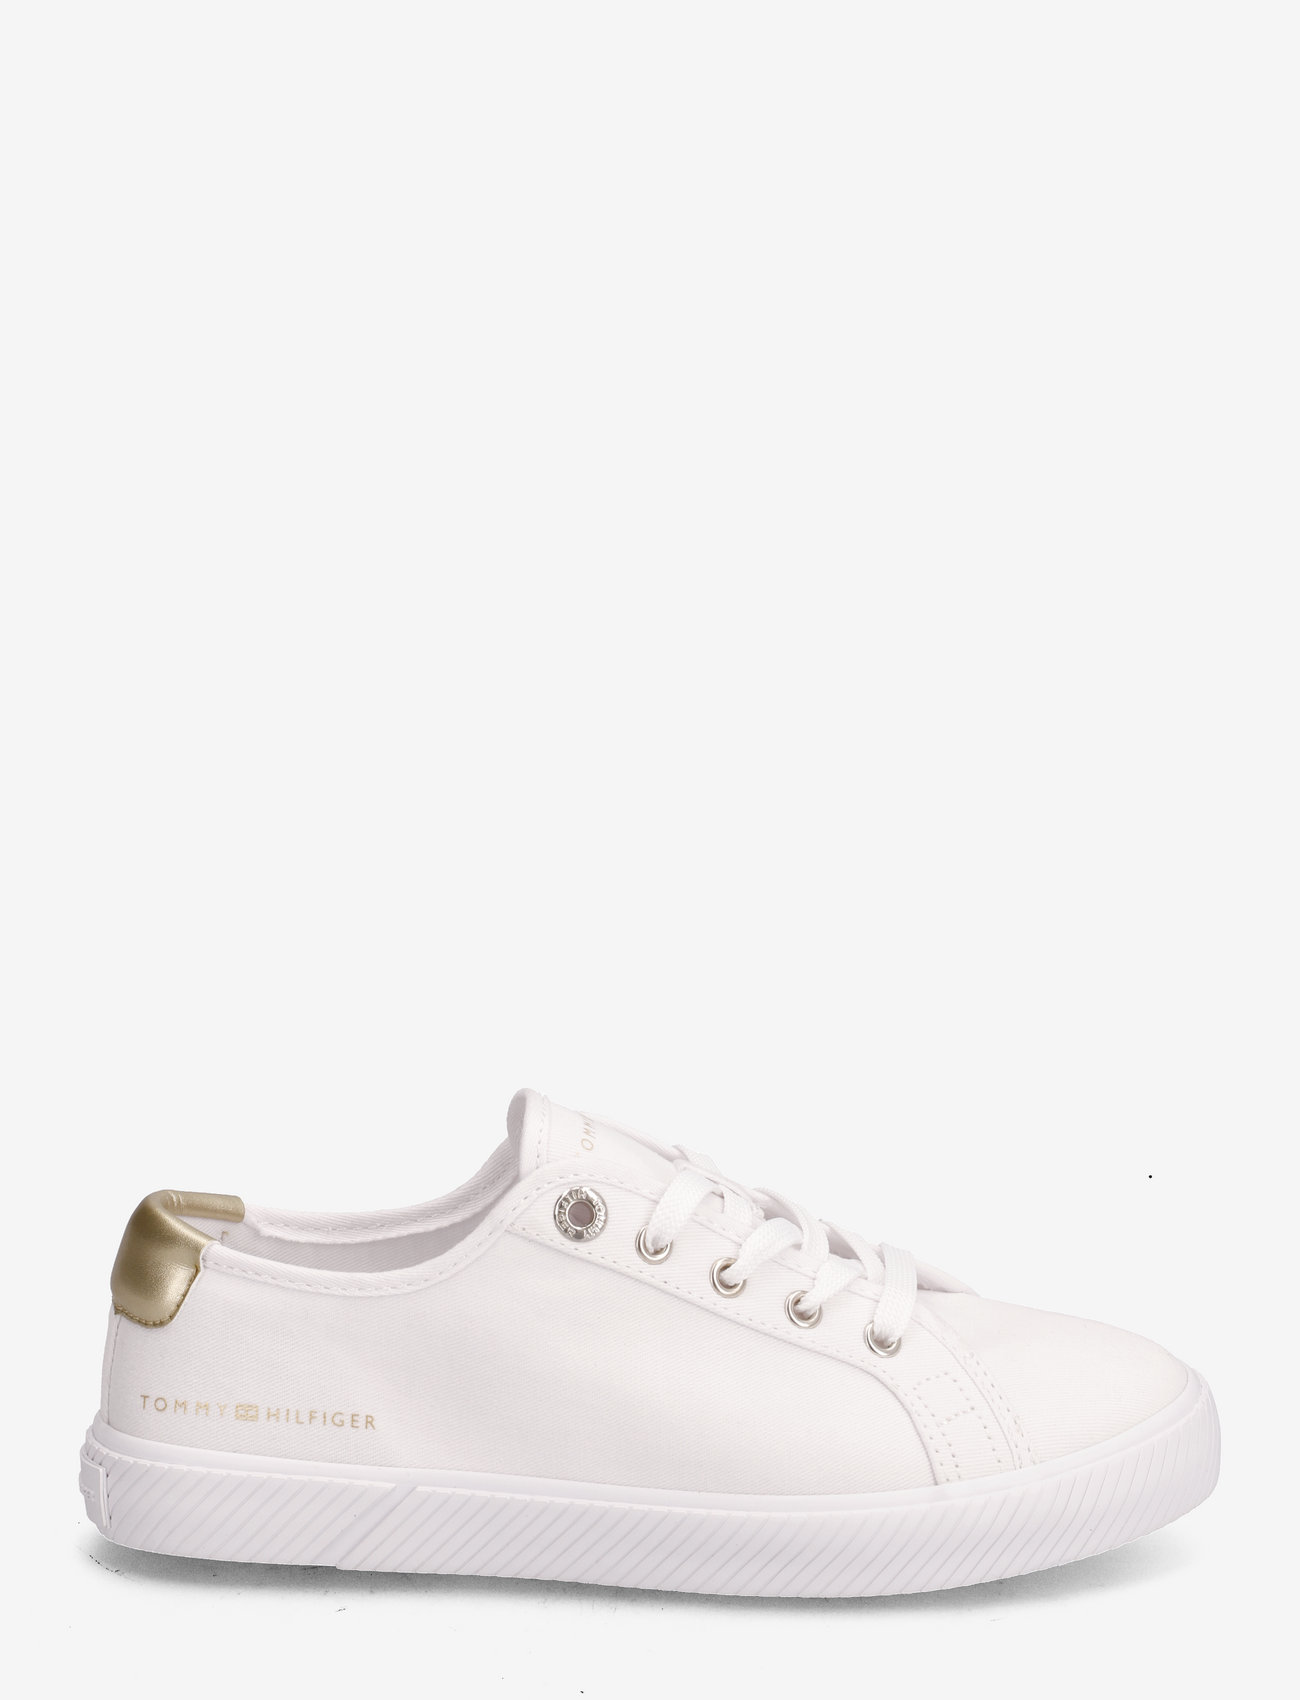 Tommy Hilfiger - LACE UP VULC SNEAKER - white - 1